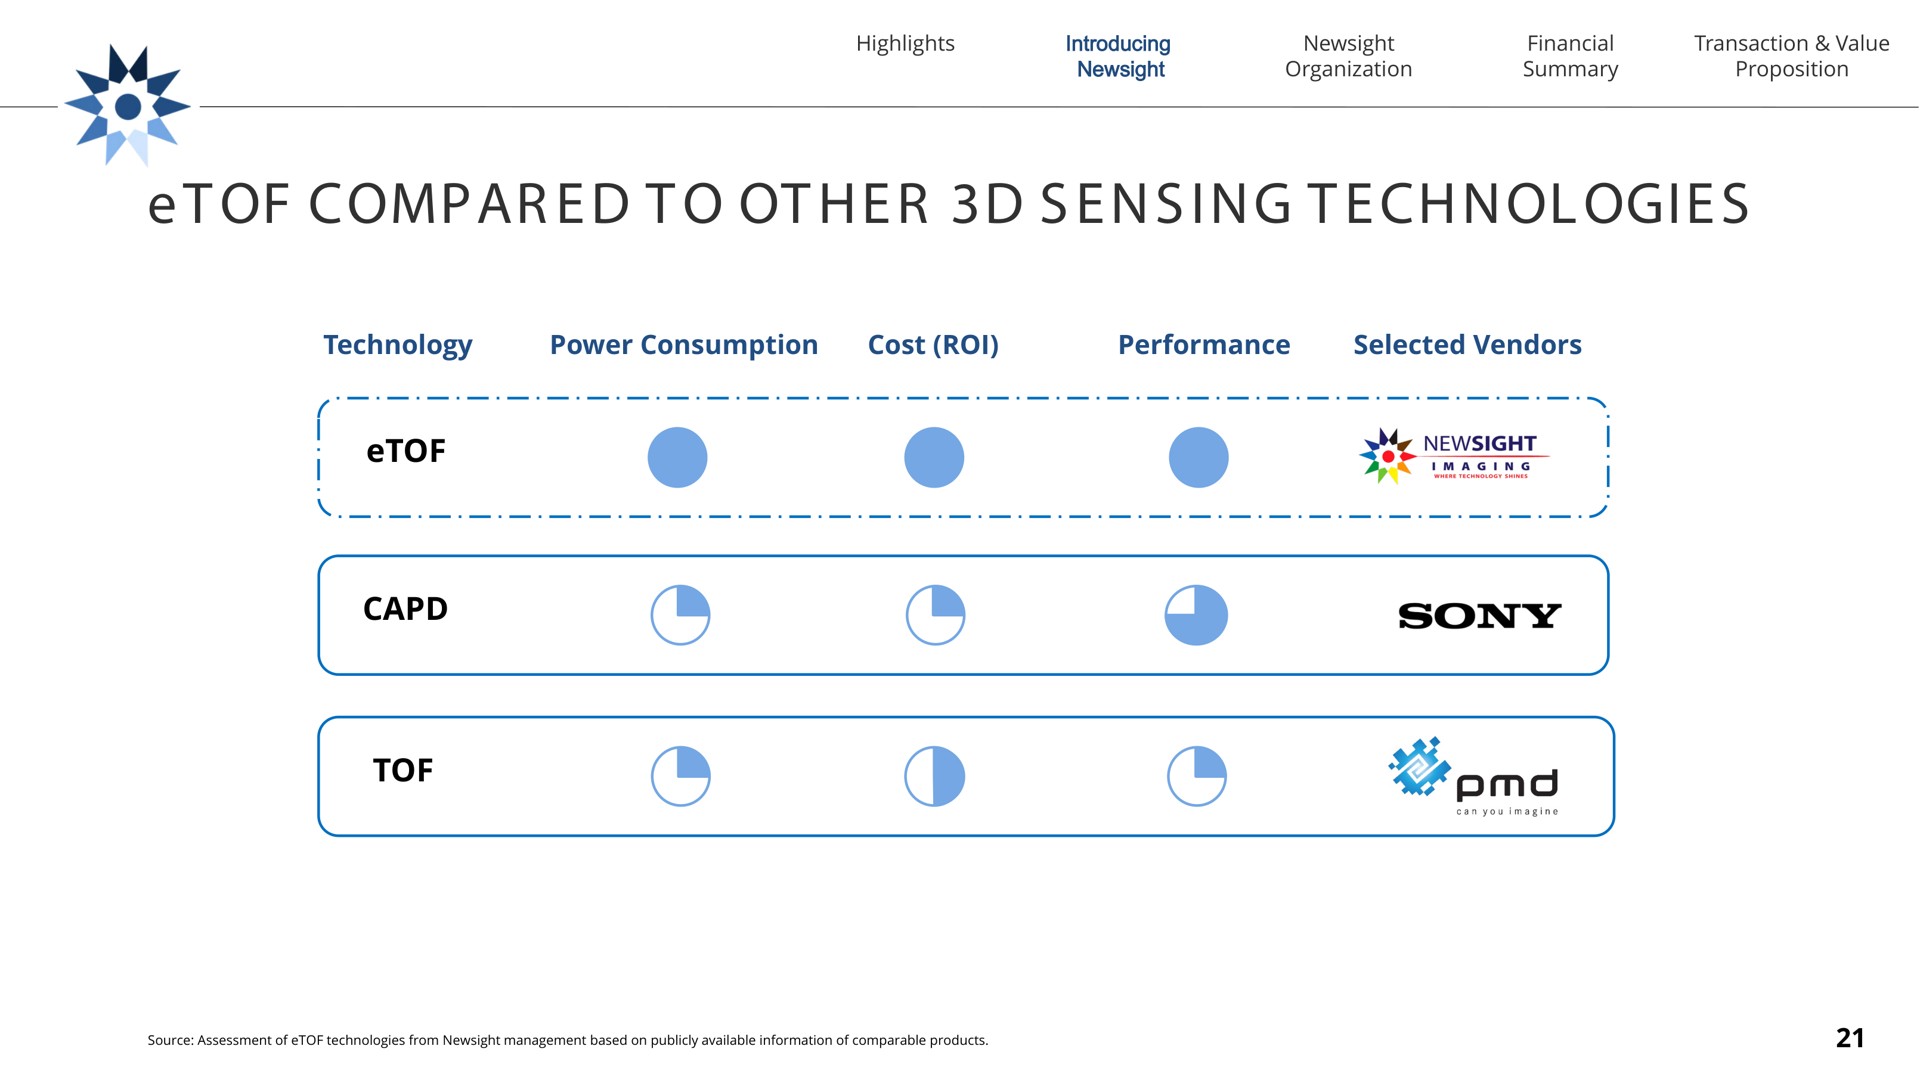 of he ing technology power consumption cost roi performance selected vendors compared to other sensing technologies ses a | Newsight Imaging